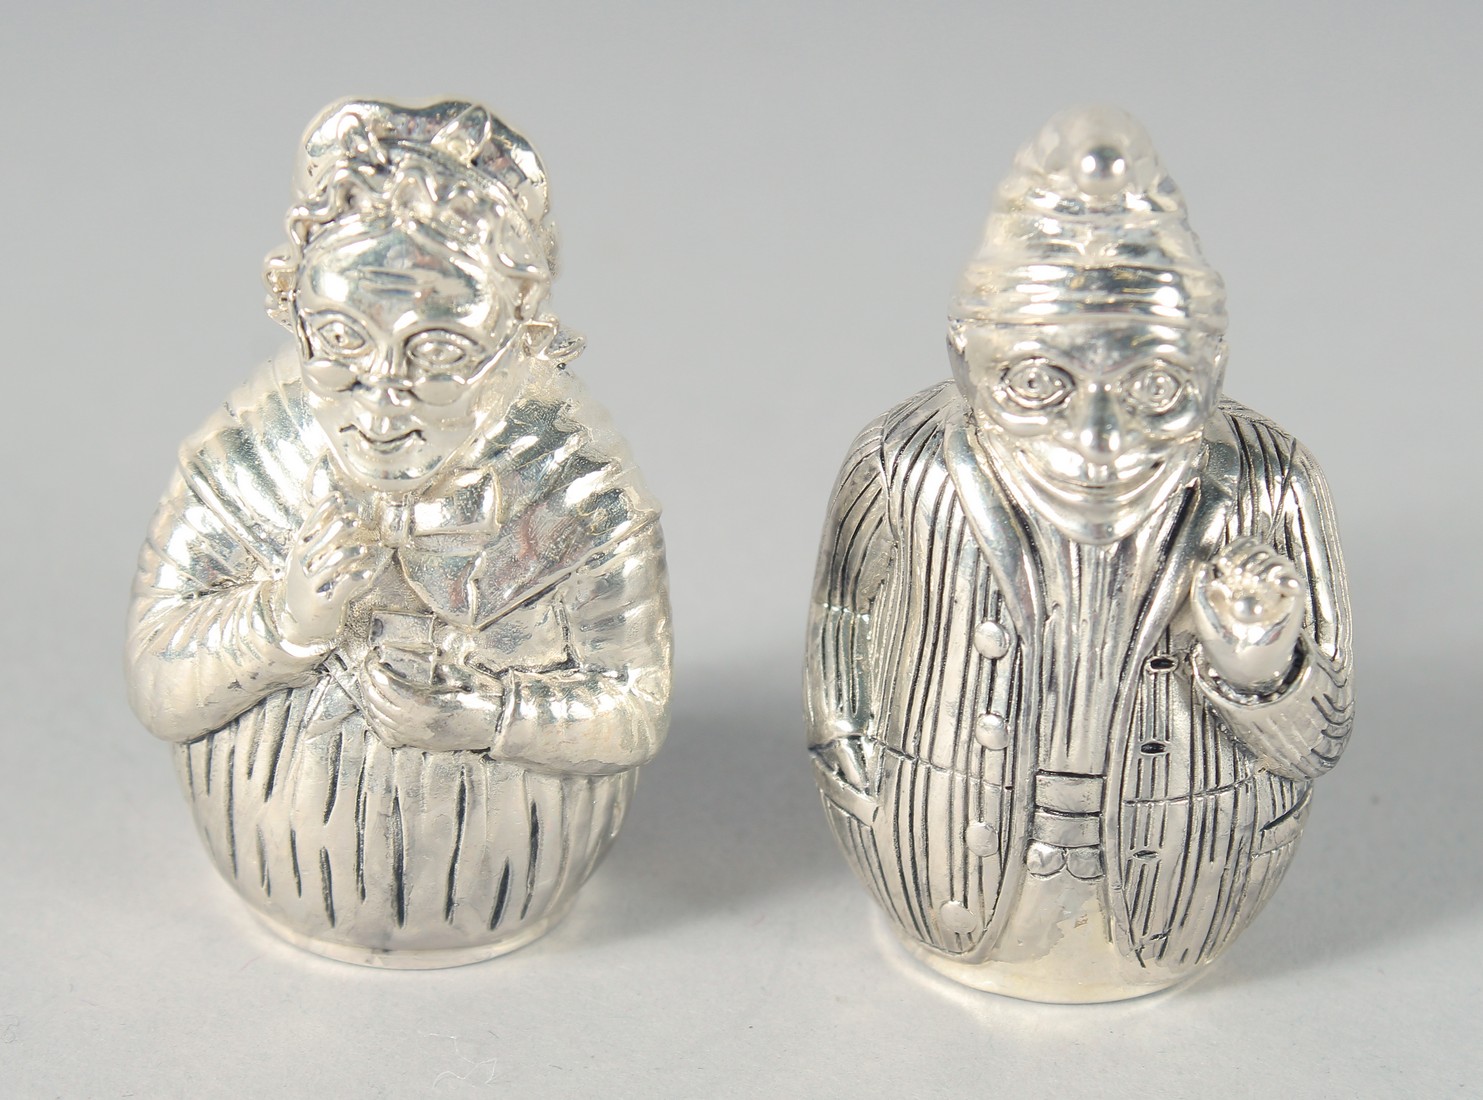 A PAIR OF SILVER-PLATED PUNCH AND JUDY SALT AND PEPPERS. 5cm